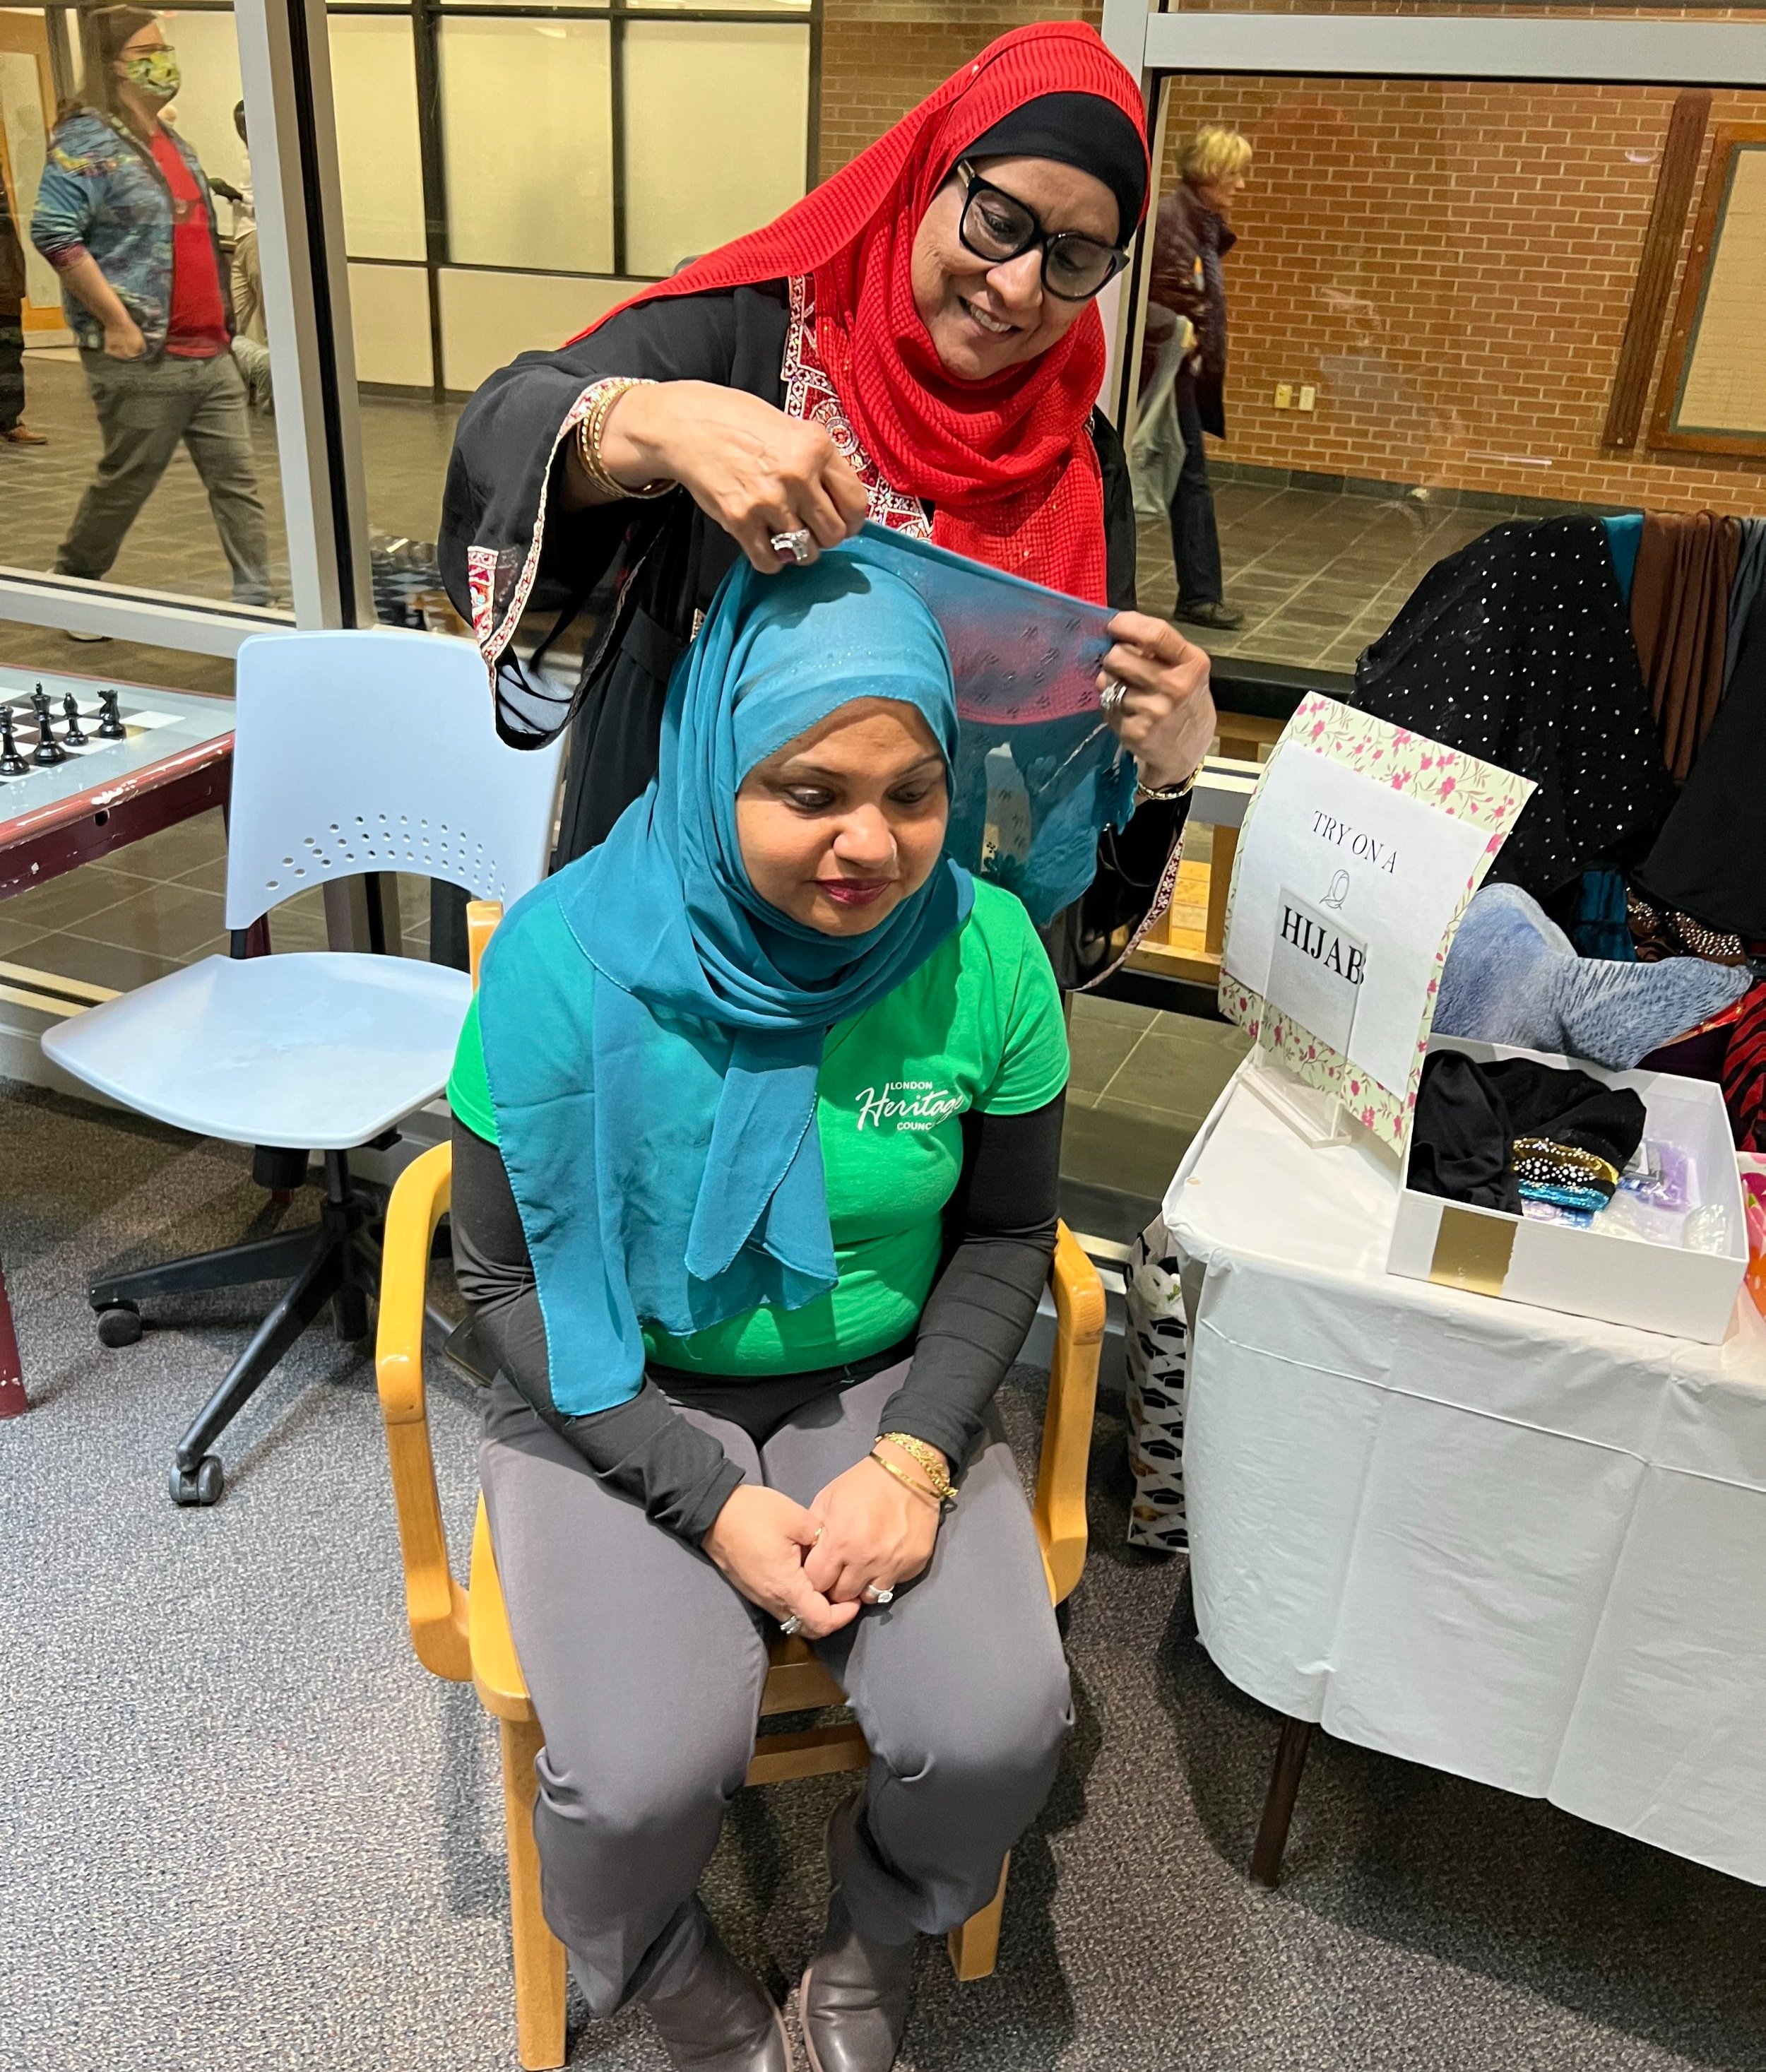 Hijab wrapping demonstration between two women